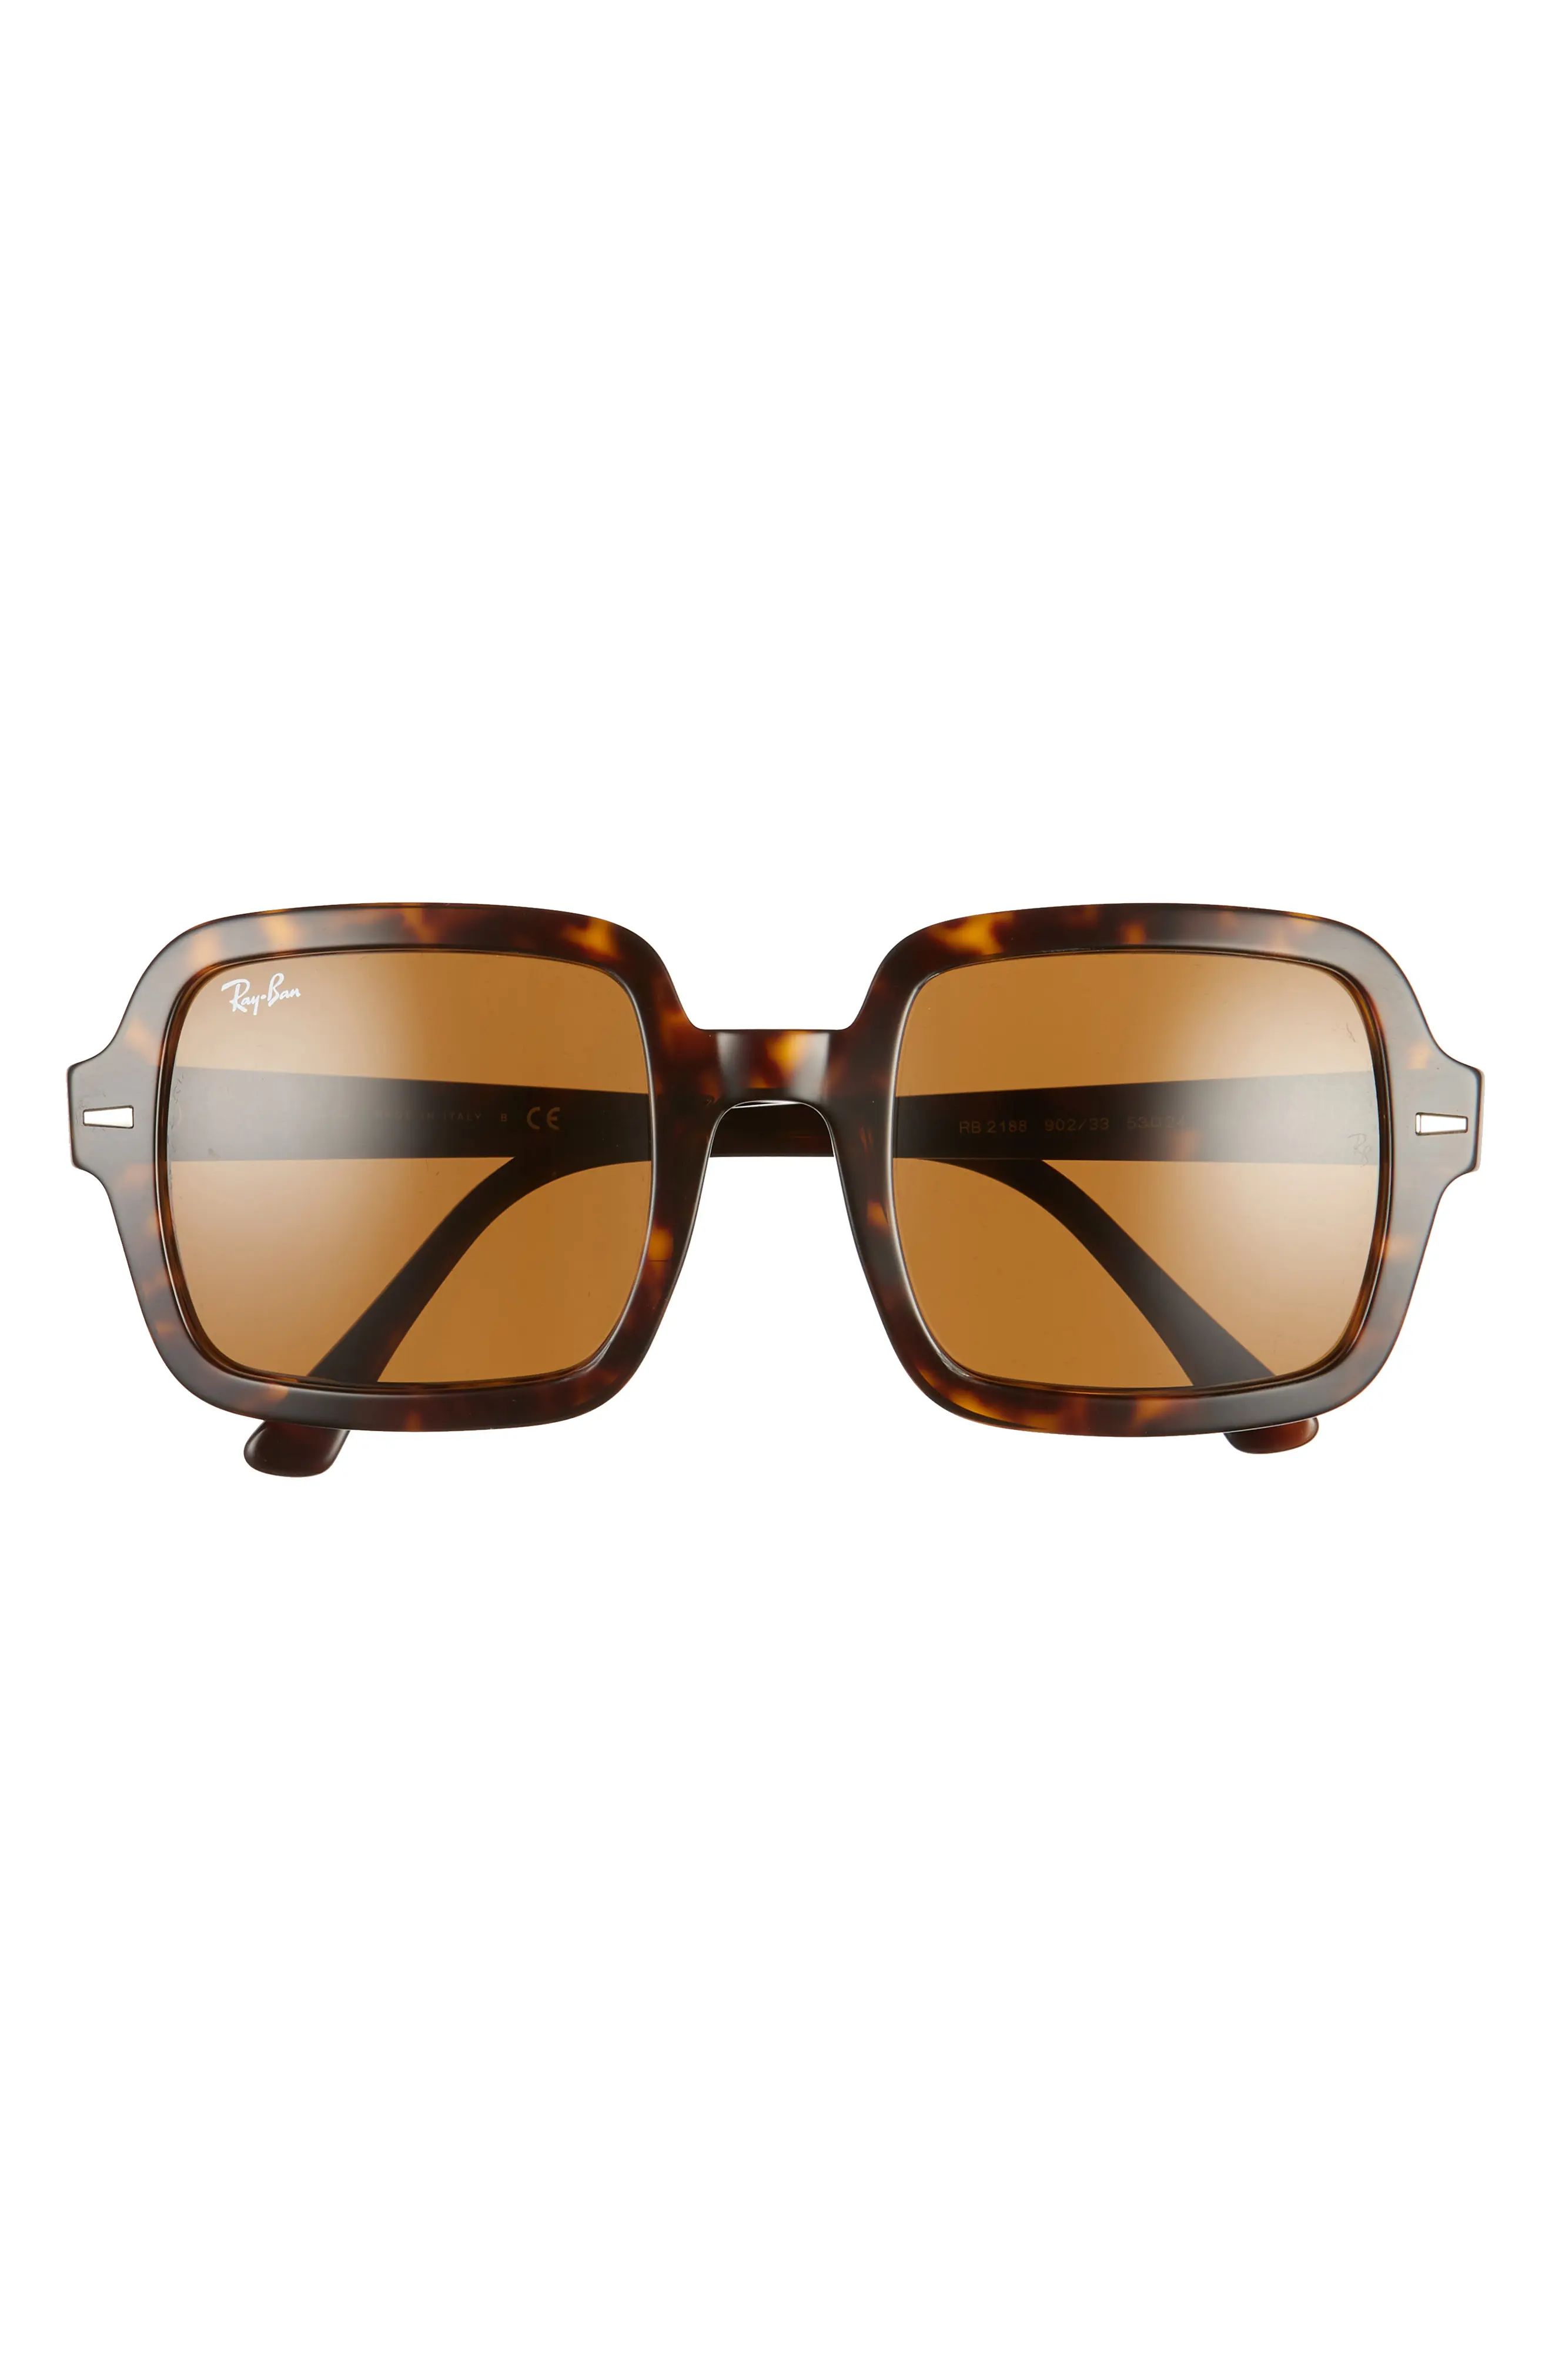 Ray-Ban 53mm Square Sunglasses in Havana/Brown Solid at Nordstrom | Nordstrom